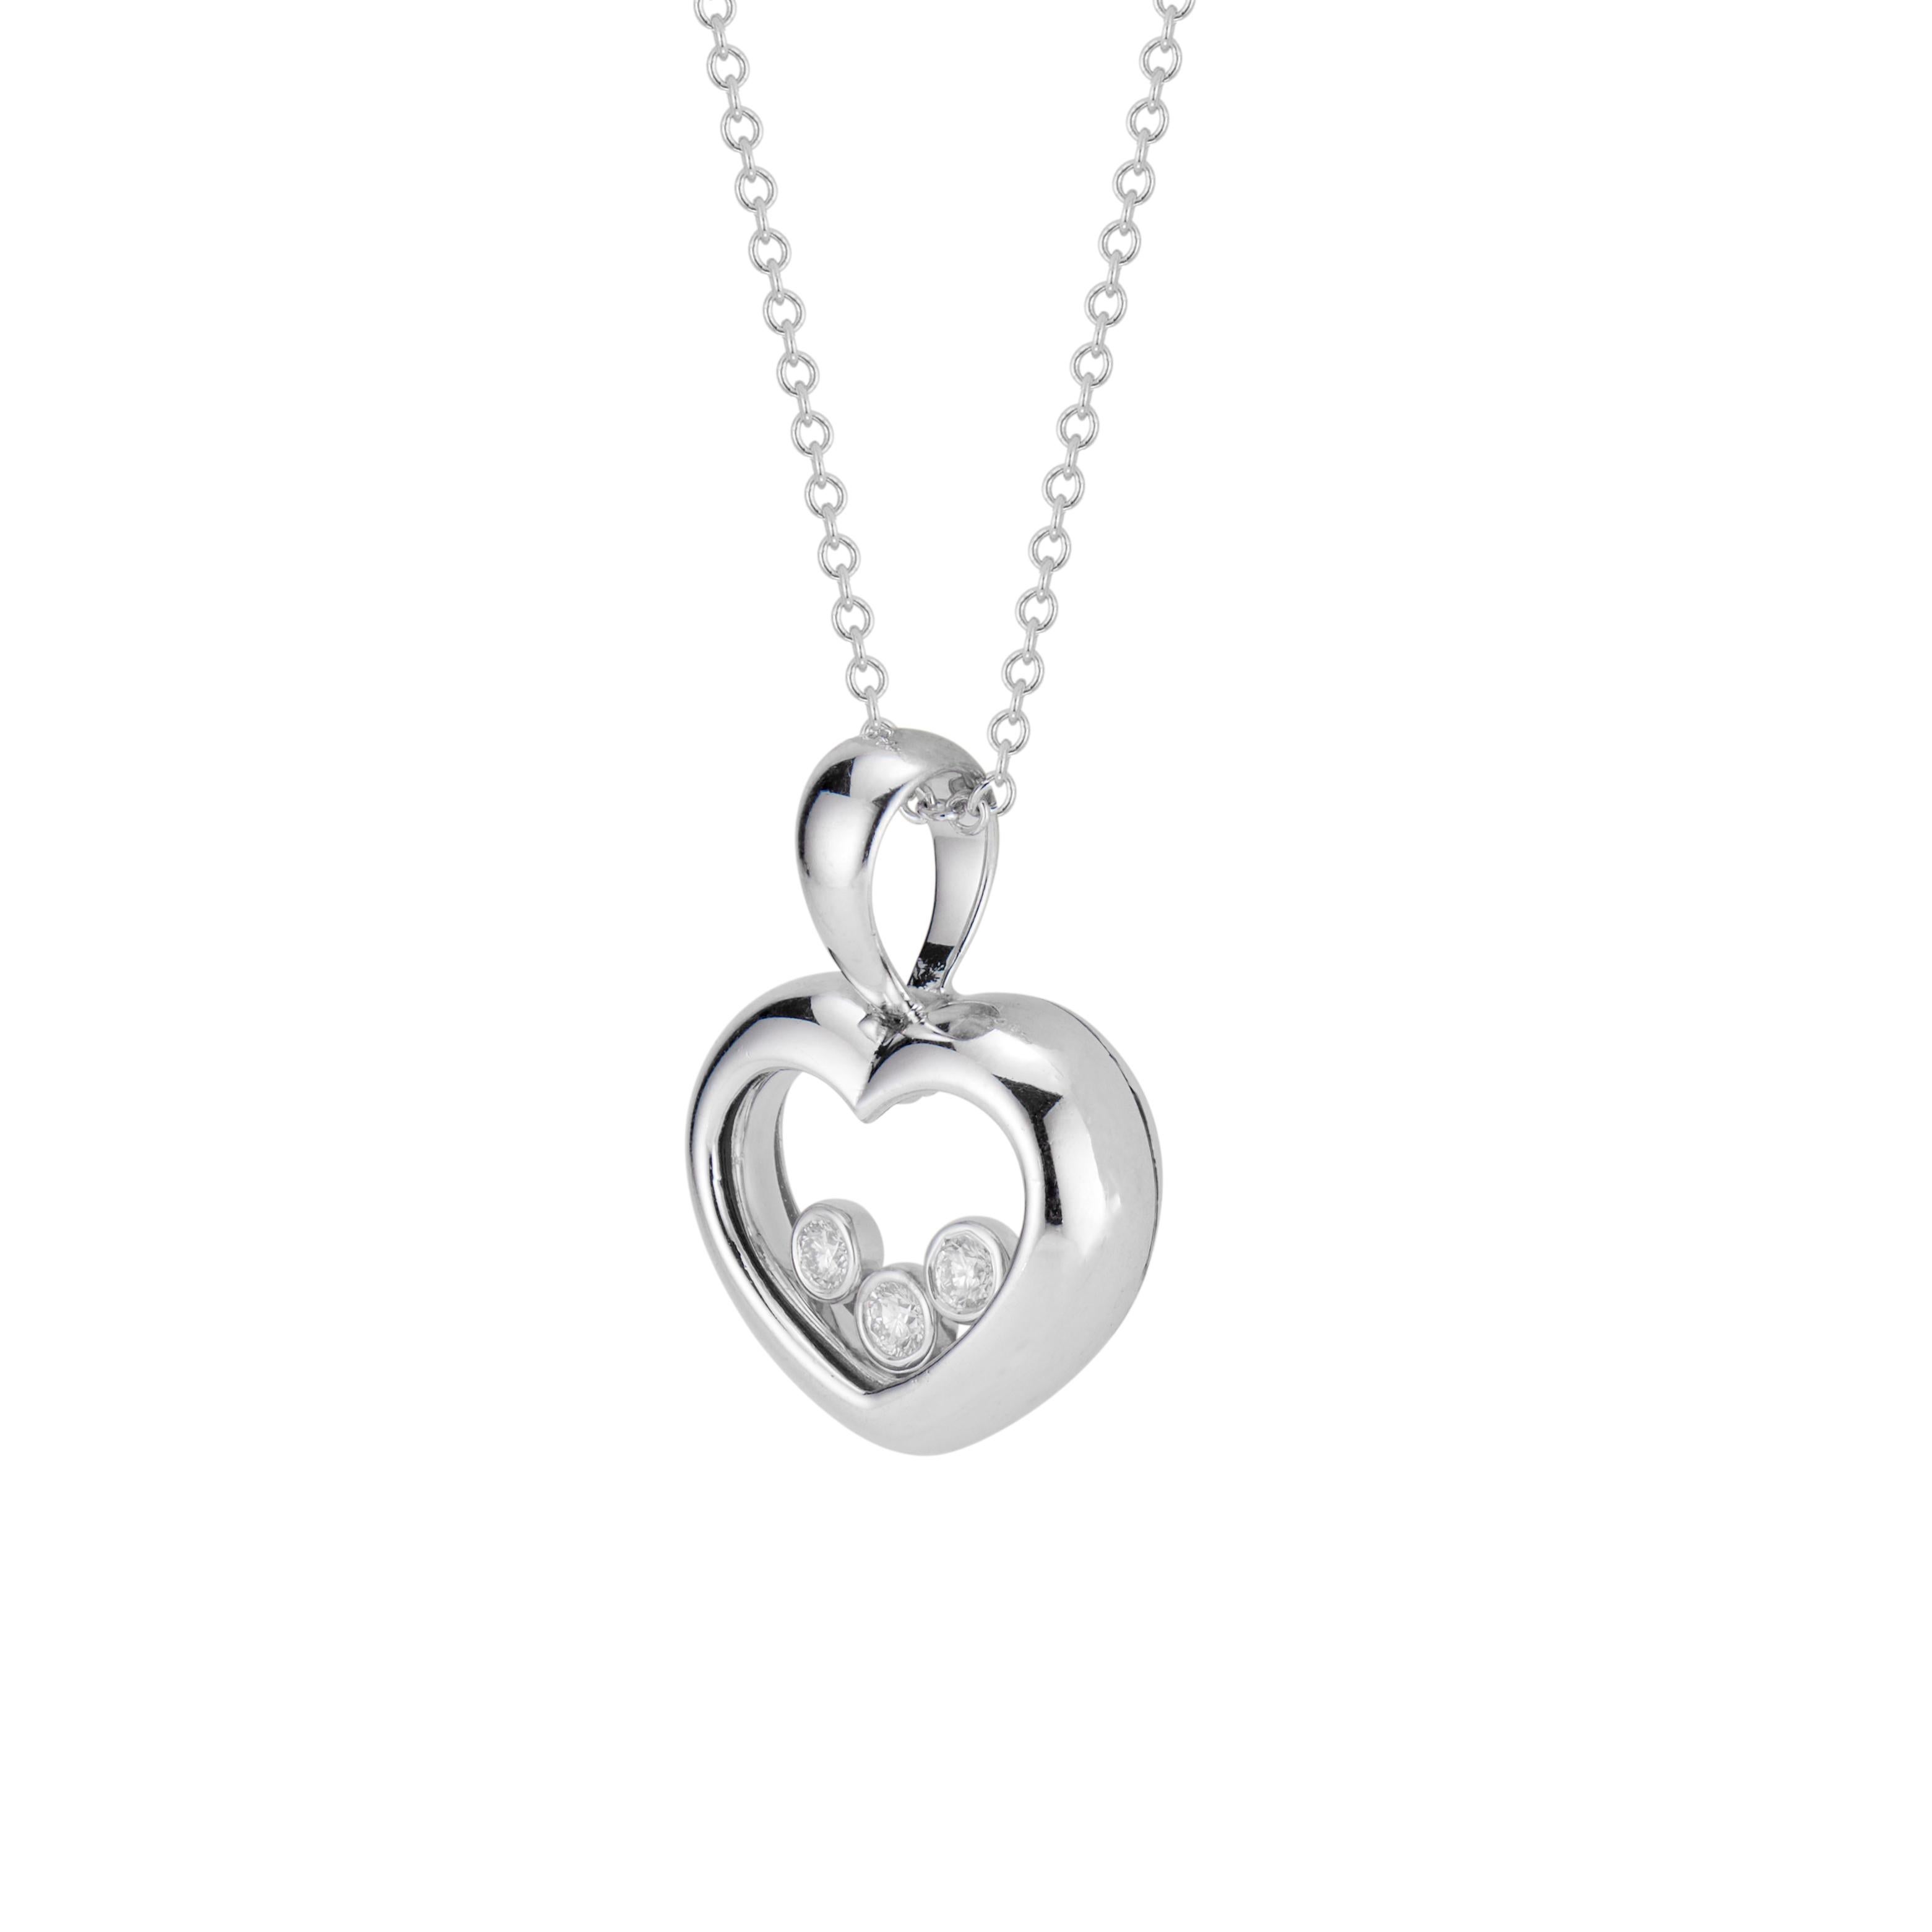 Open heart diamond pendant necklace. 18k white gold open heart pendant with three floating diamonds on a 16 Inch cable chain with lobster catch.

3 round brilliant cut diamonds, G-H VS approx. .12cts
18k white gold 
Stamped: 18k
6 grams 
Top to